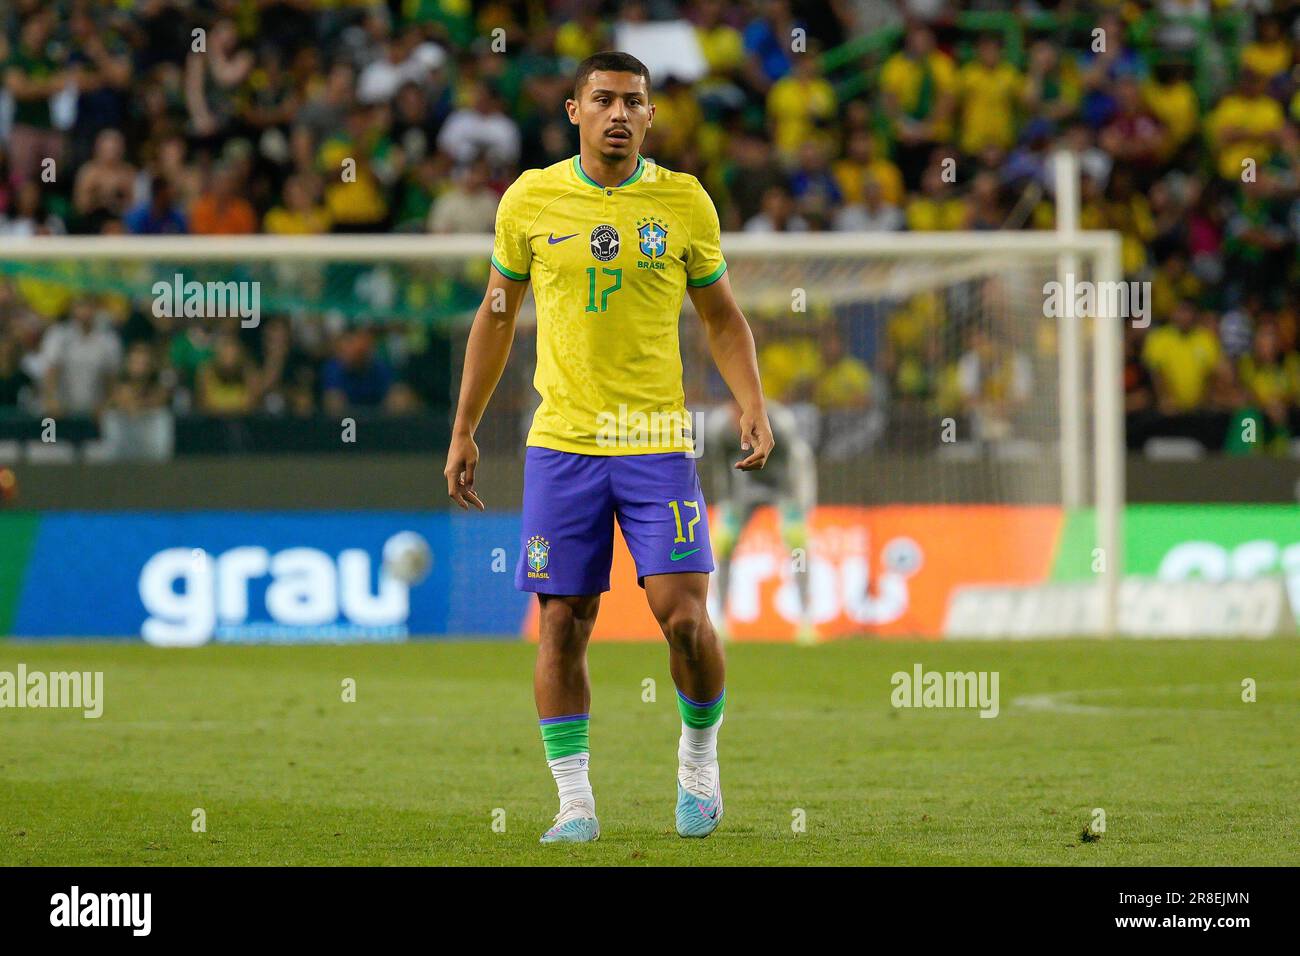 Andre Trinidade da Costa Neto from Brazil in action during the friendly football match between Brazil and Senegal at Estadio Jose Alvalade. Final Score: Brazil 2:4 Senegal (Photo by Bruno de Carvalho / SOPA Images/Sipa USA) Stock Photo